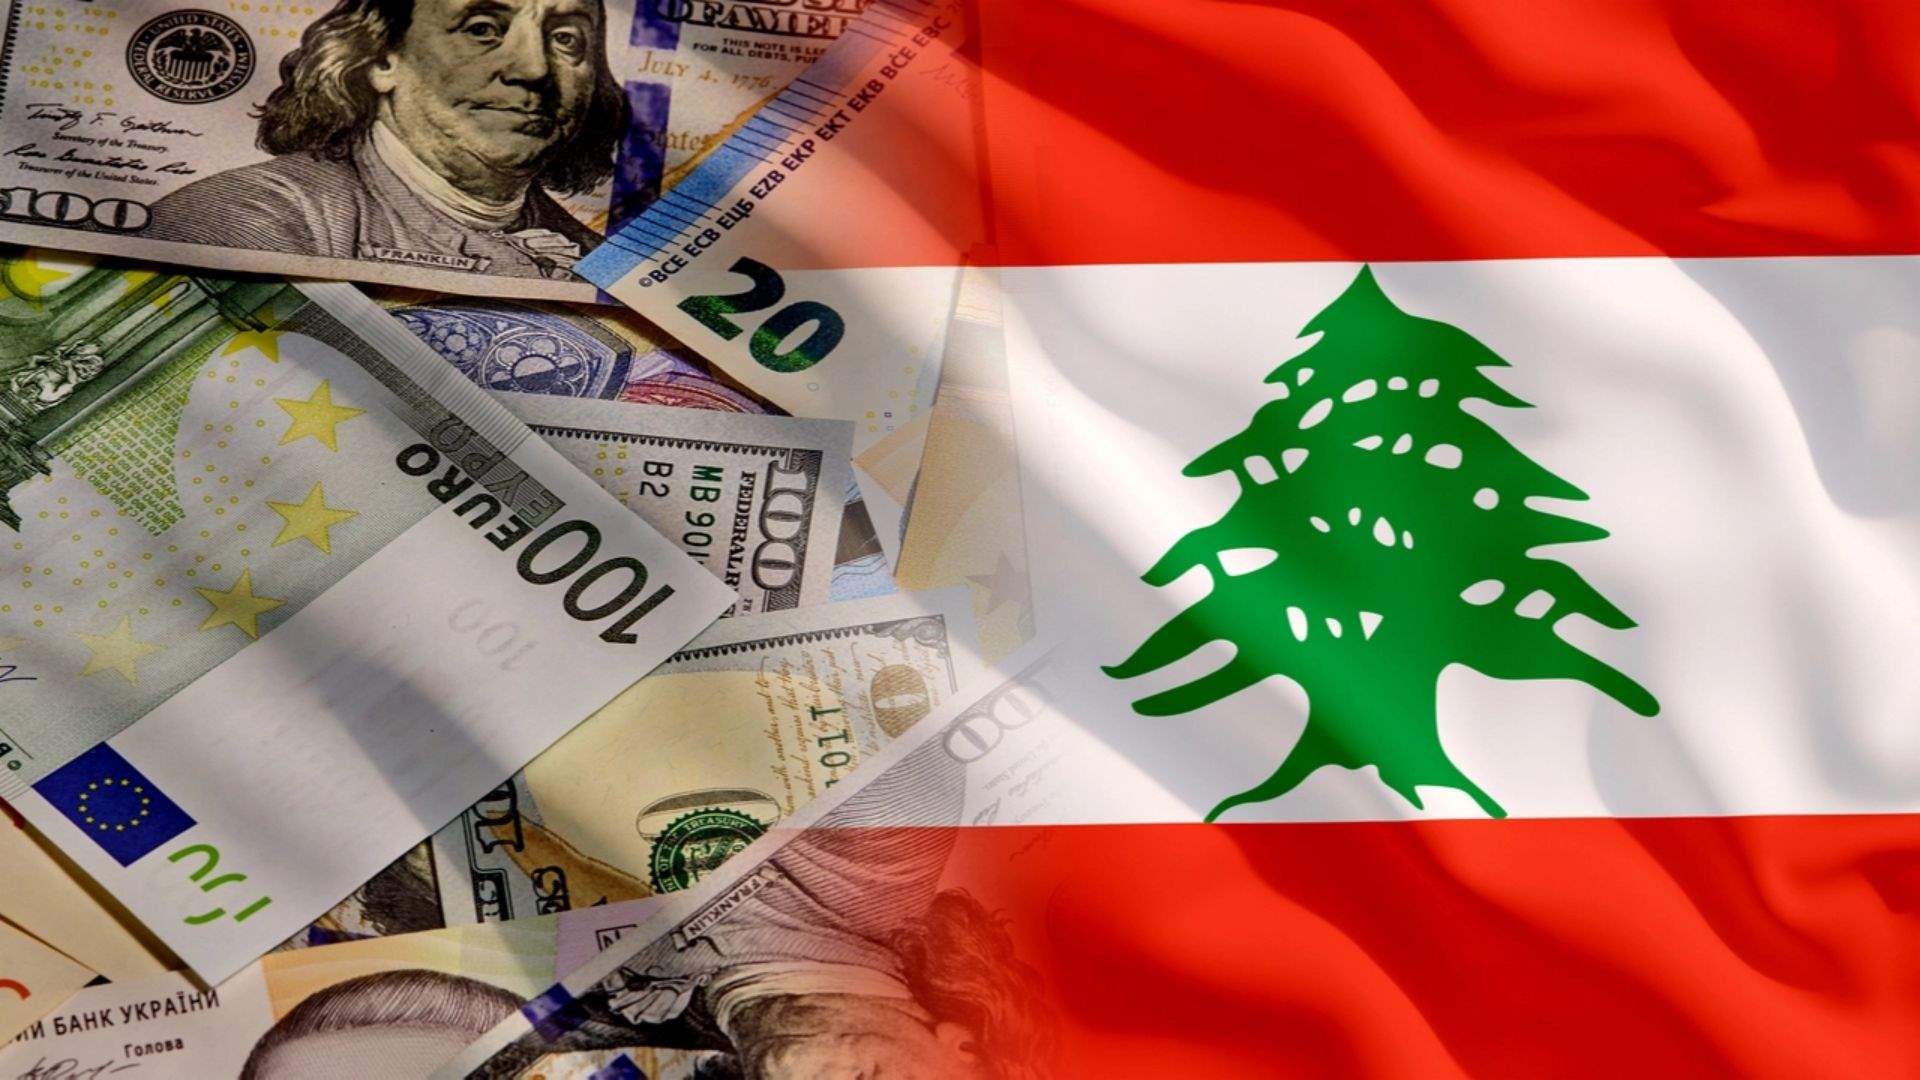 Foreign assistance played a vital role in post-war Lebanon: report